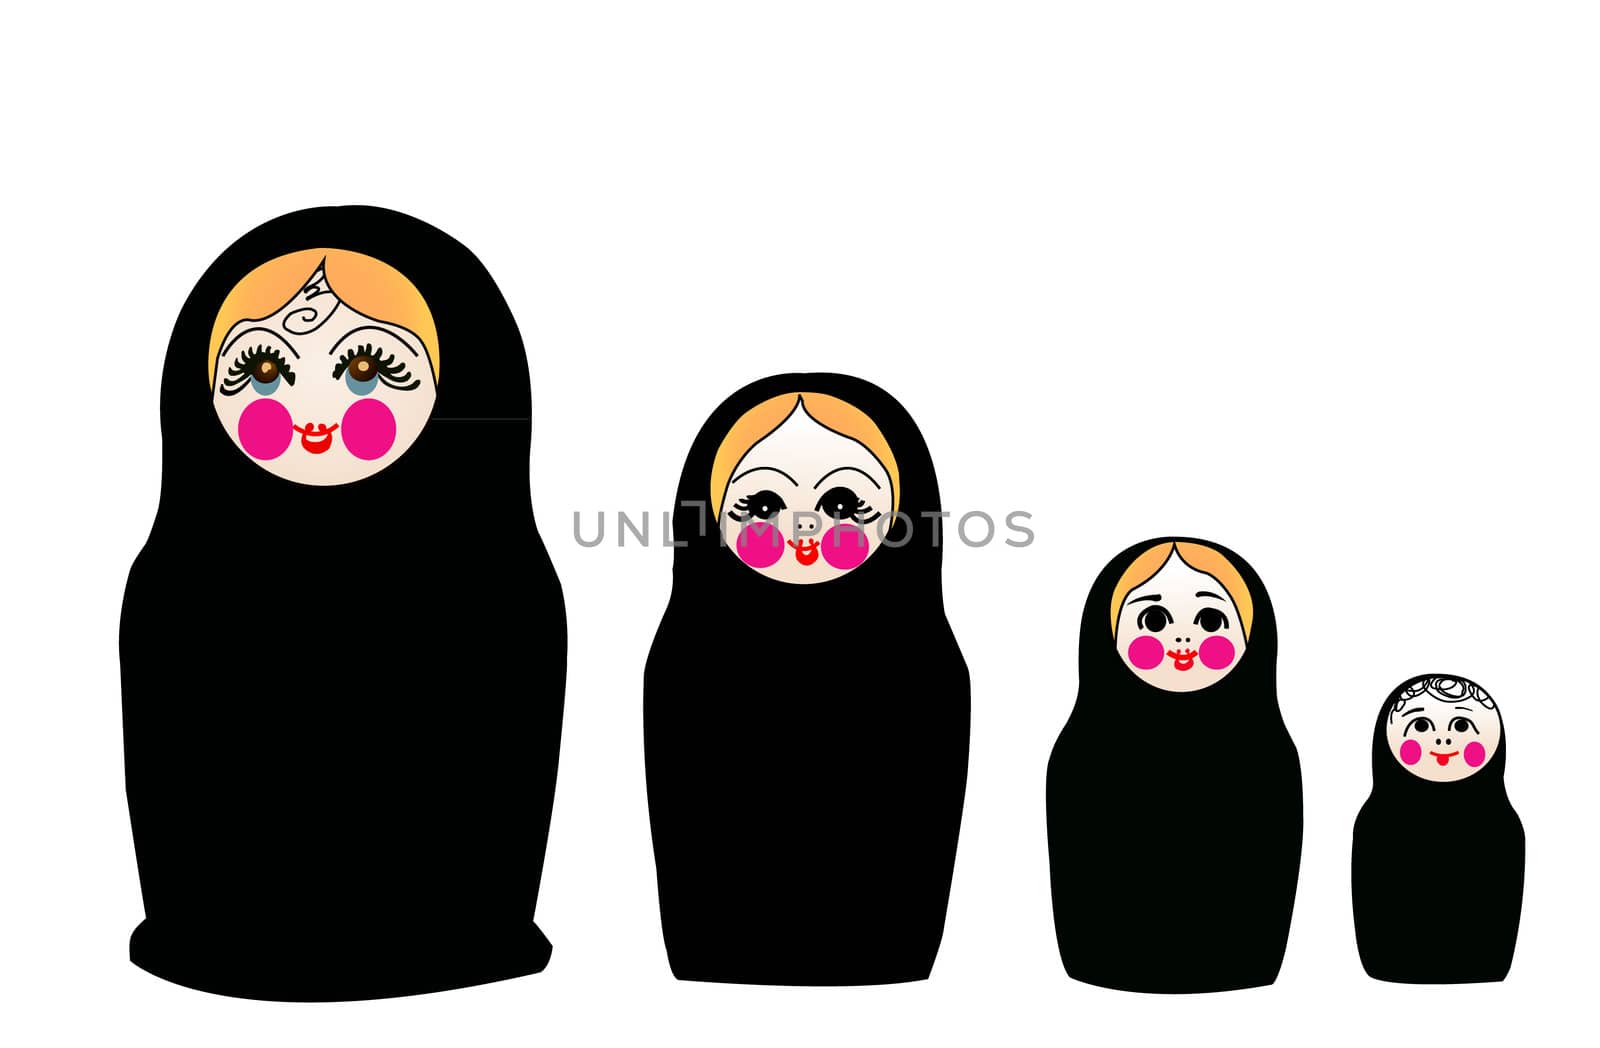 matrushka converted to islam, in black chador, by Dr.G